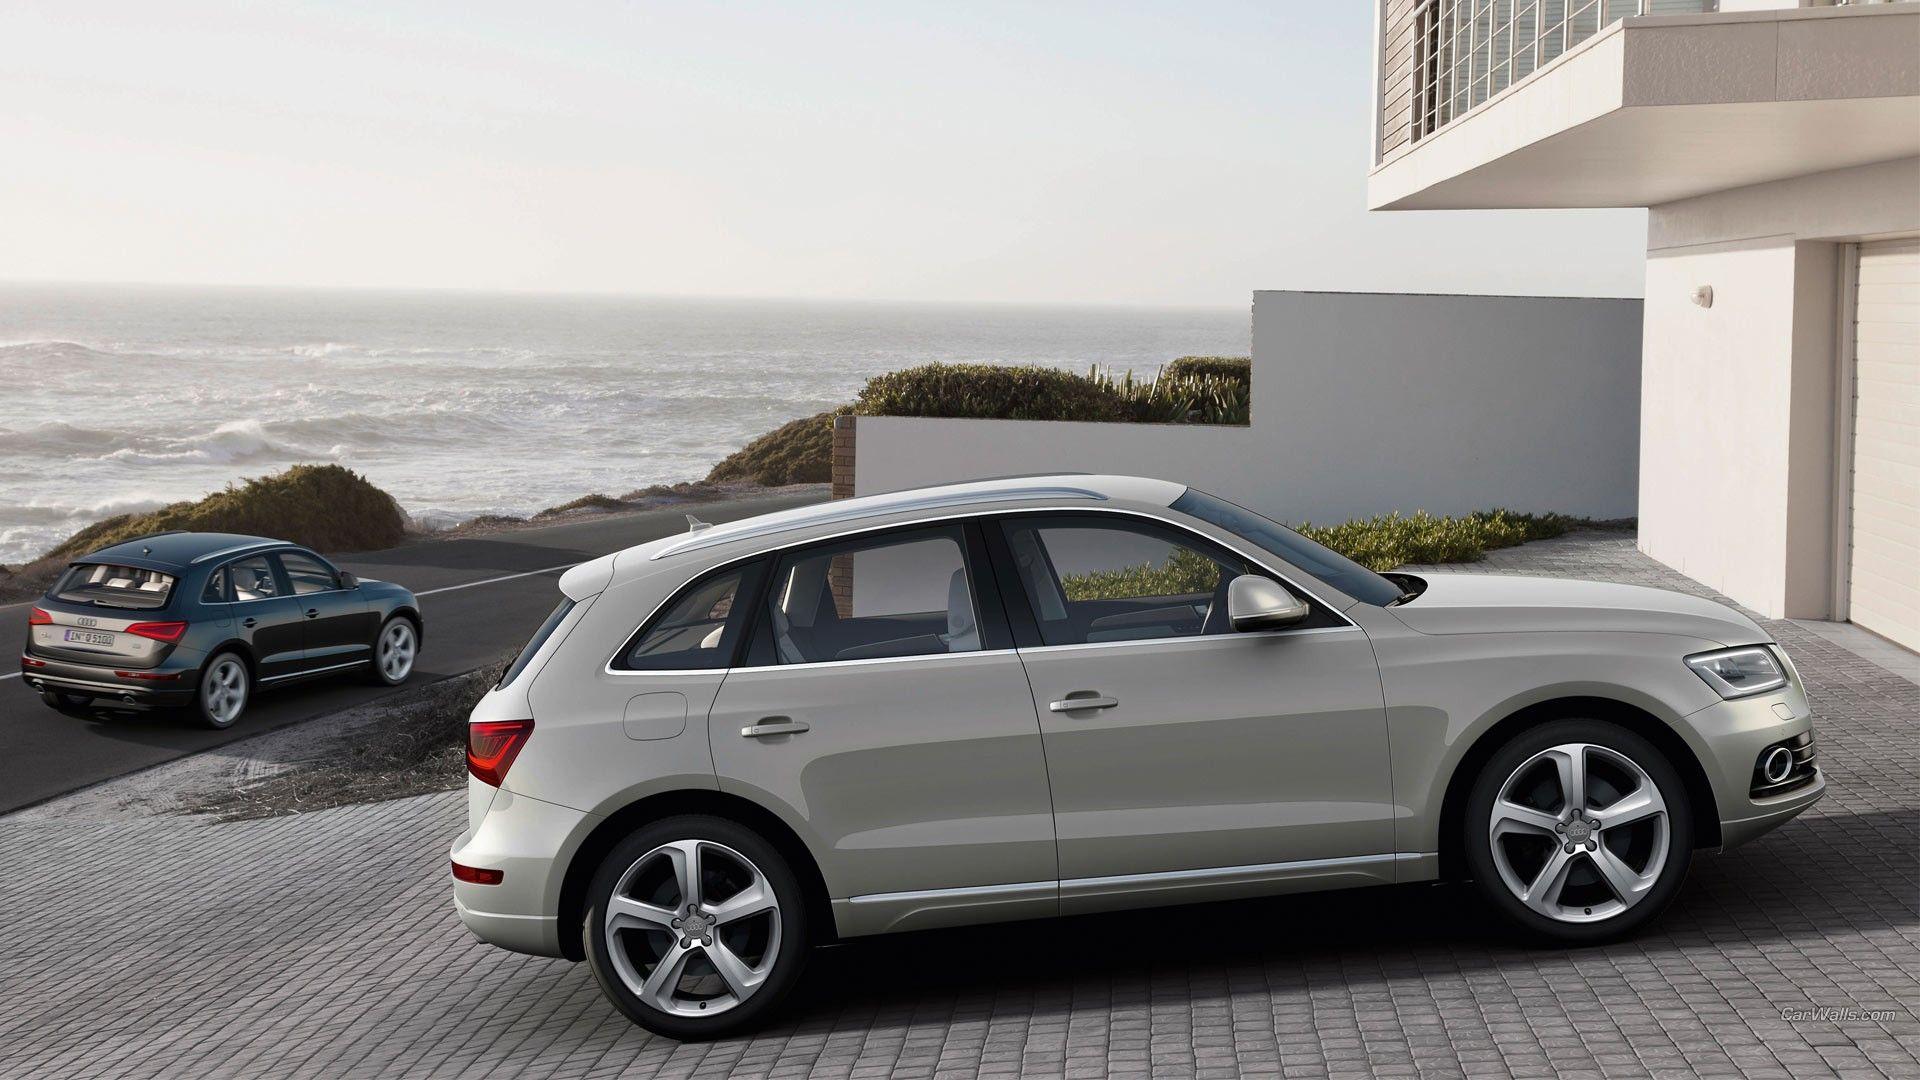 New Audi Q5 Car Picture HD Wallpaper Image Download Free